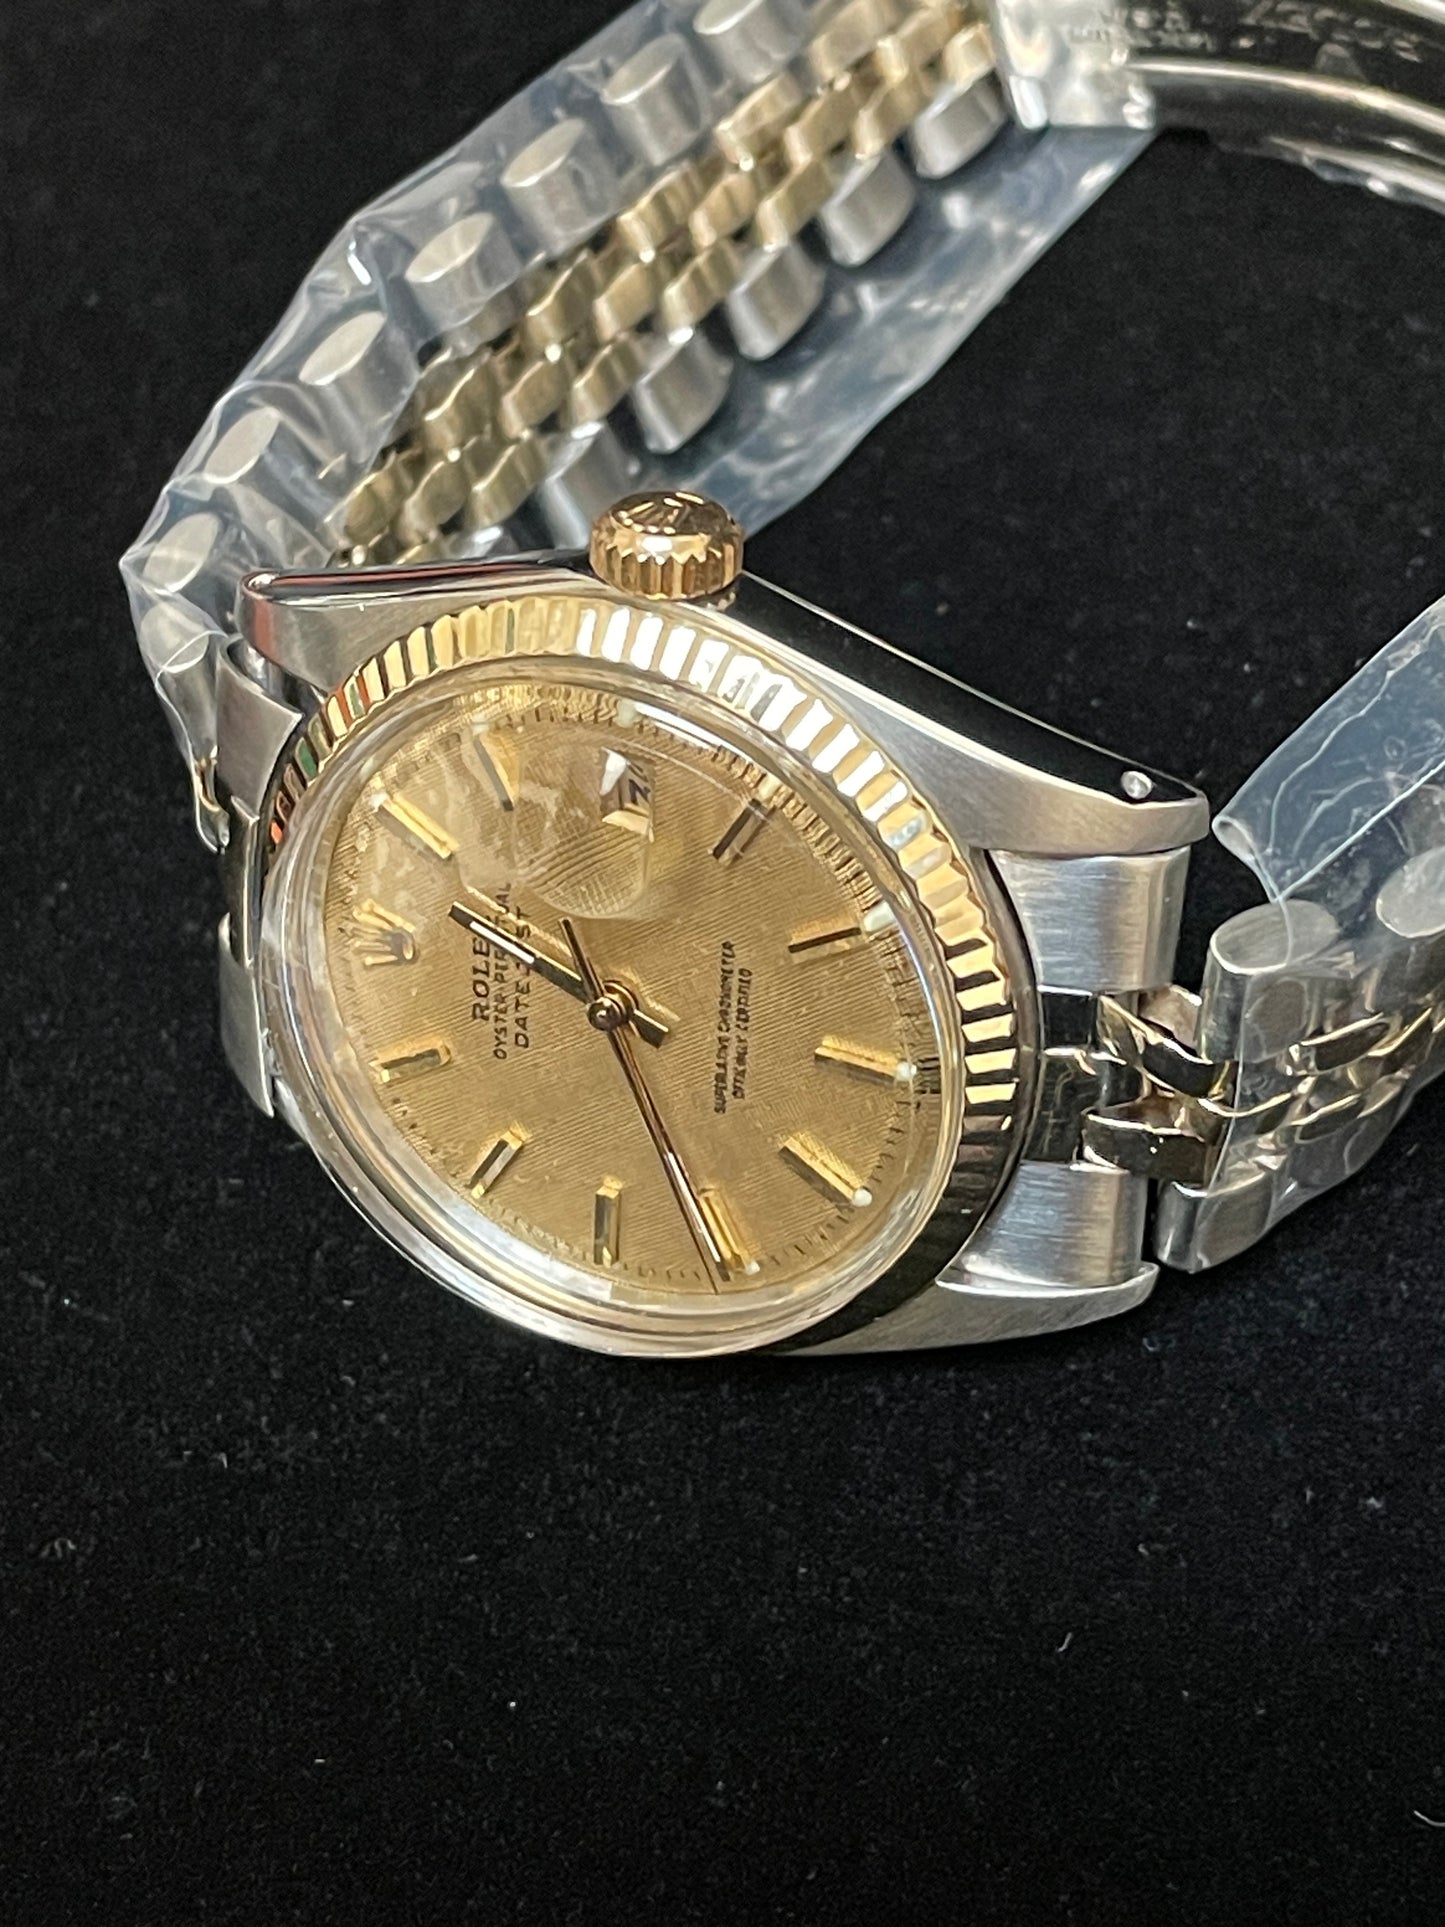 1978 Rolex Datejust 1601 Champagne Dial TT Jubilee No Papers 36mm